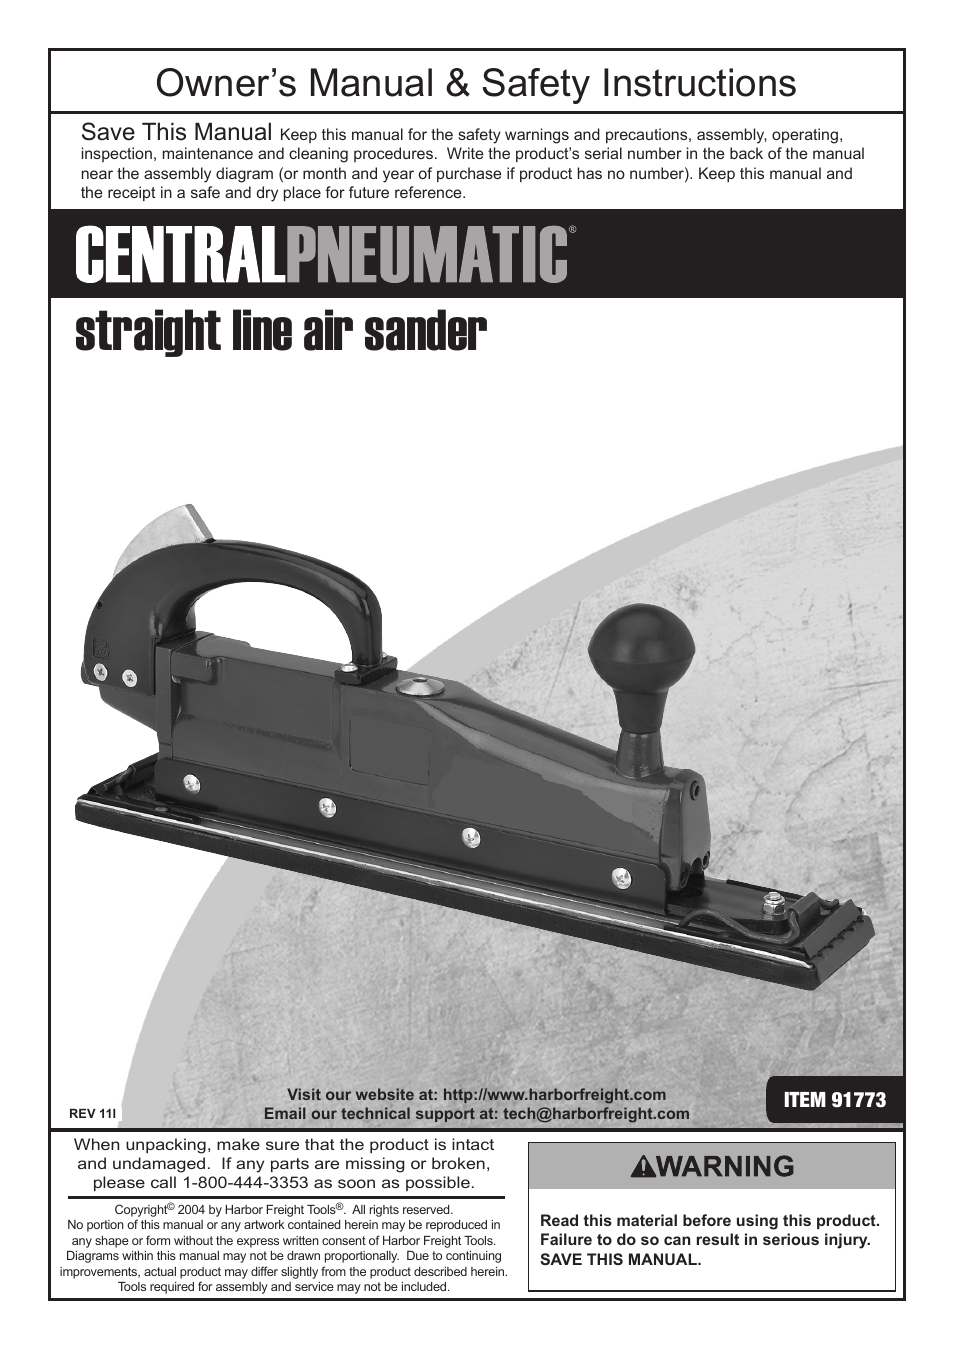 CENTRAL PNEUMATIC 91773